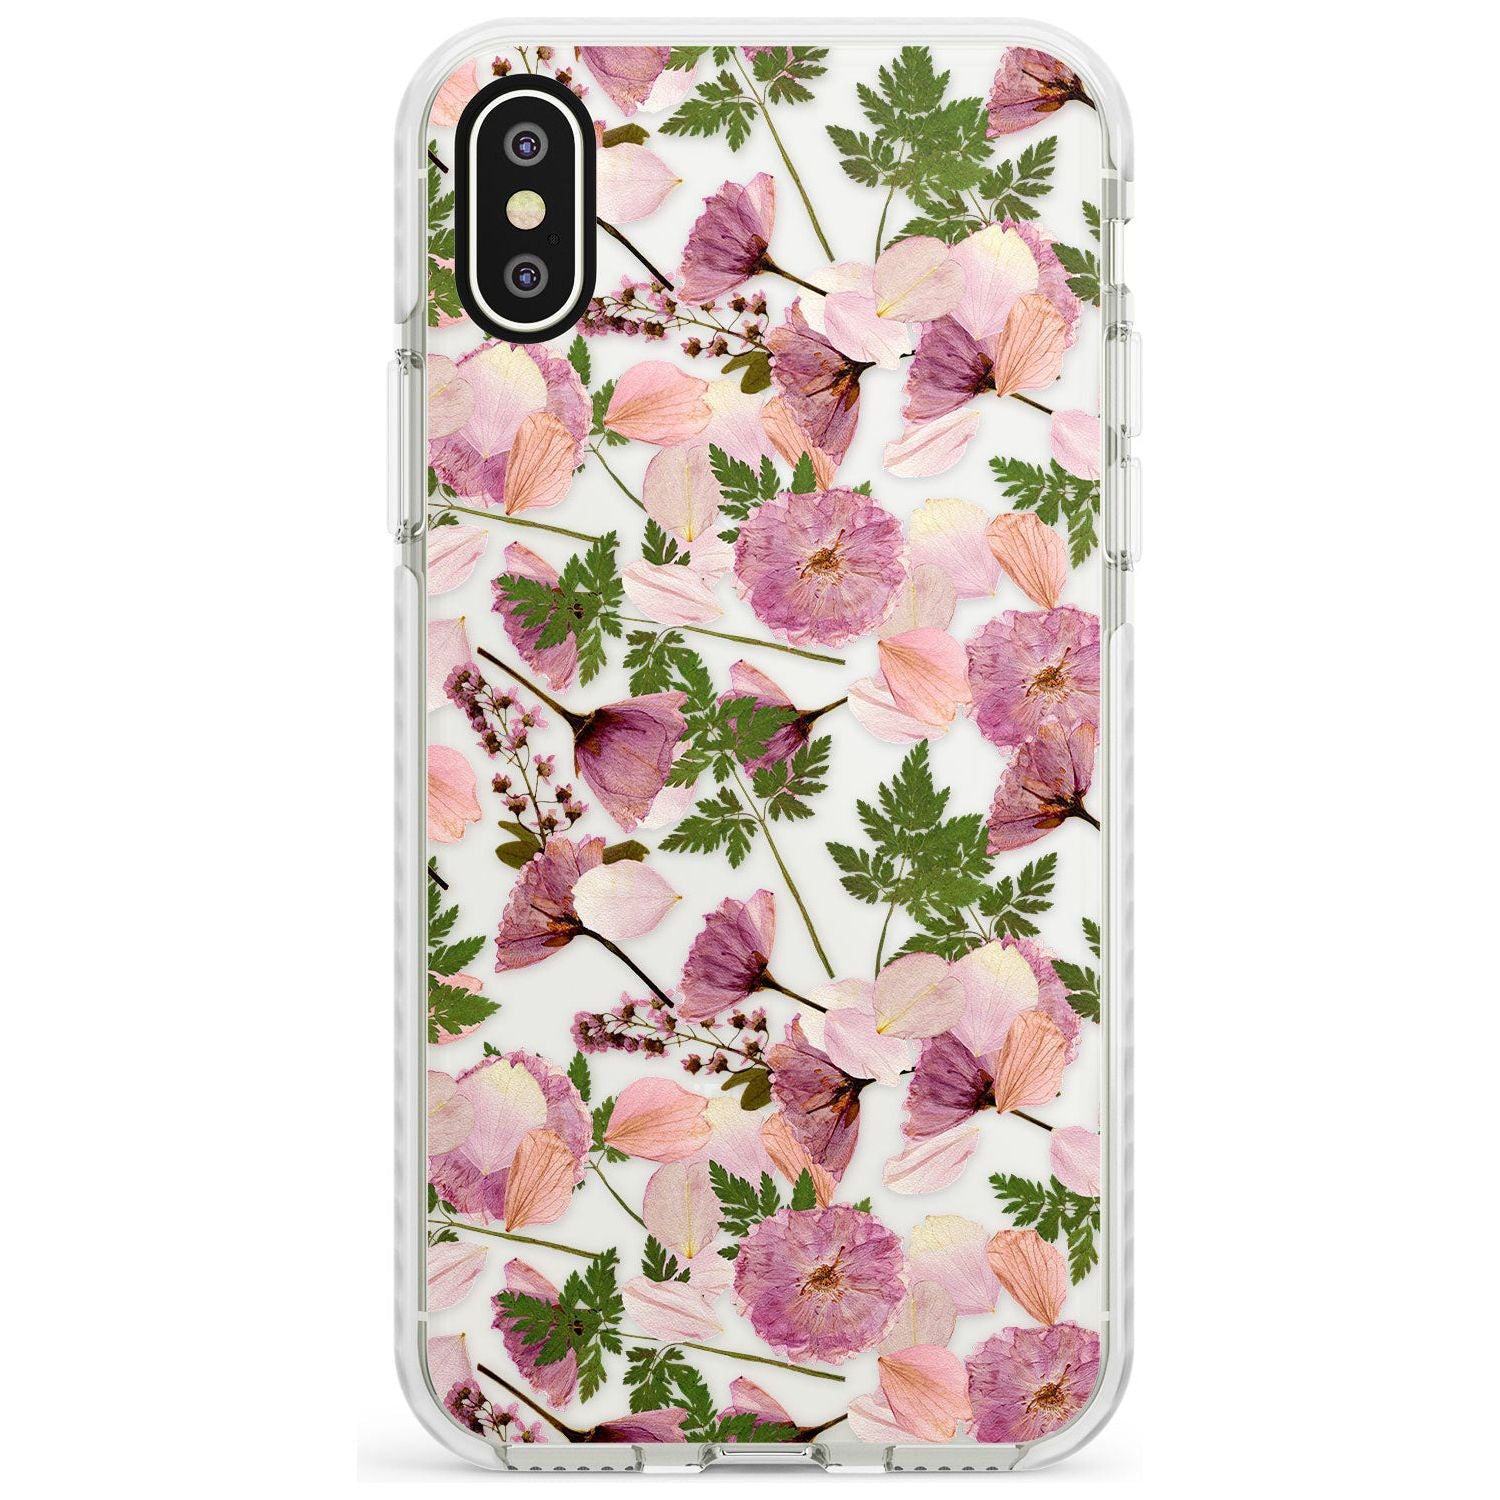 Leafy Floral Pattern Transparent Design Impact Phone Case for iPhone X XS Max XR